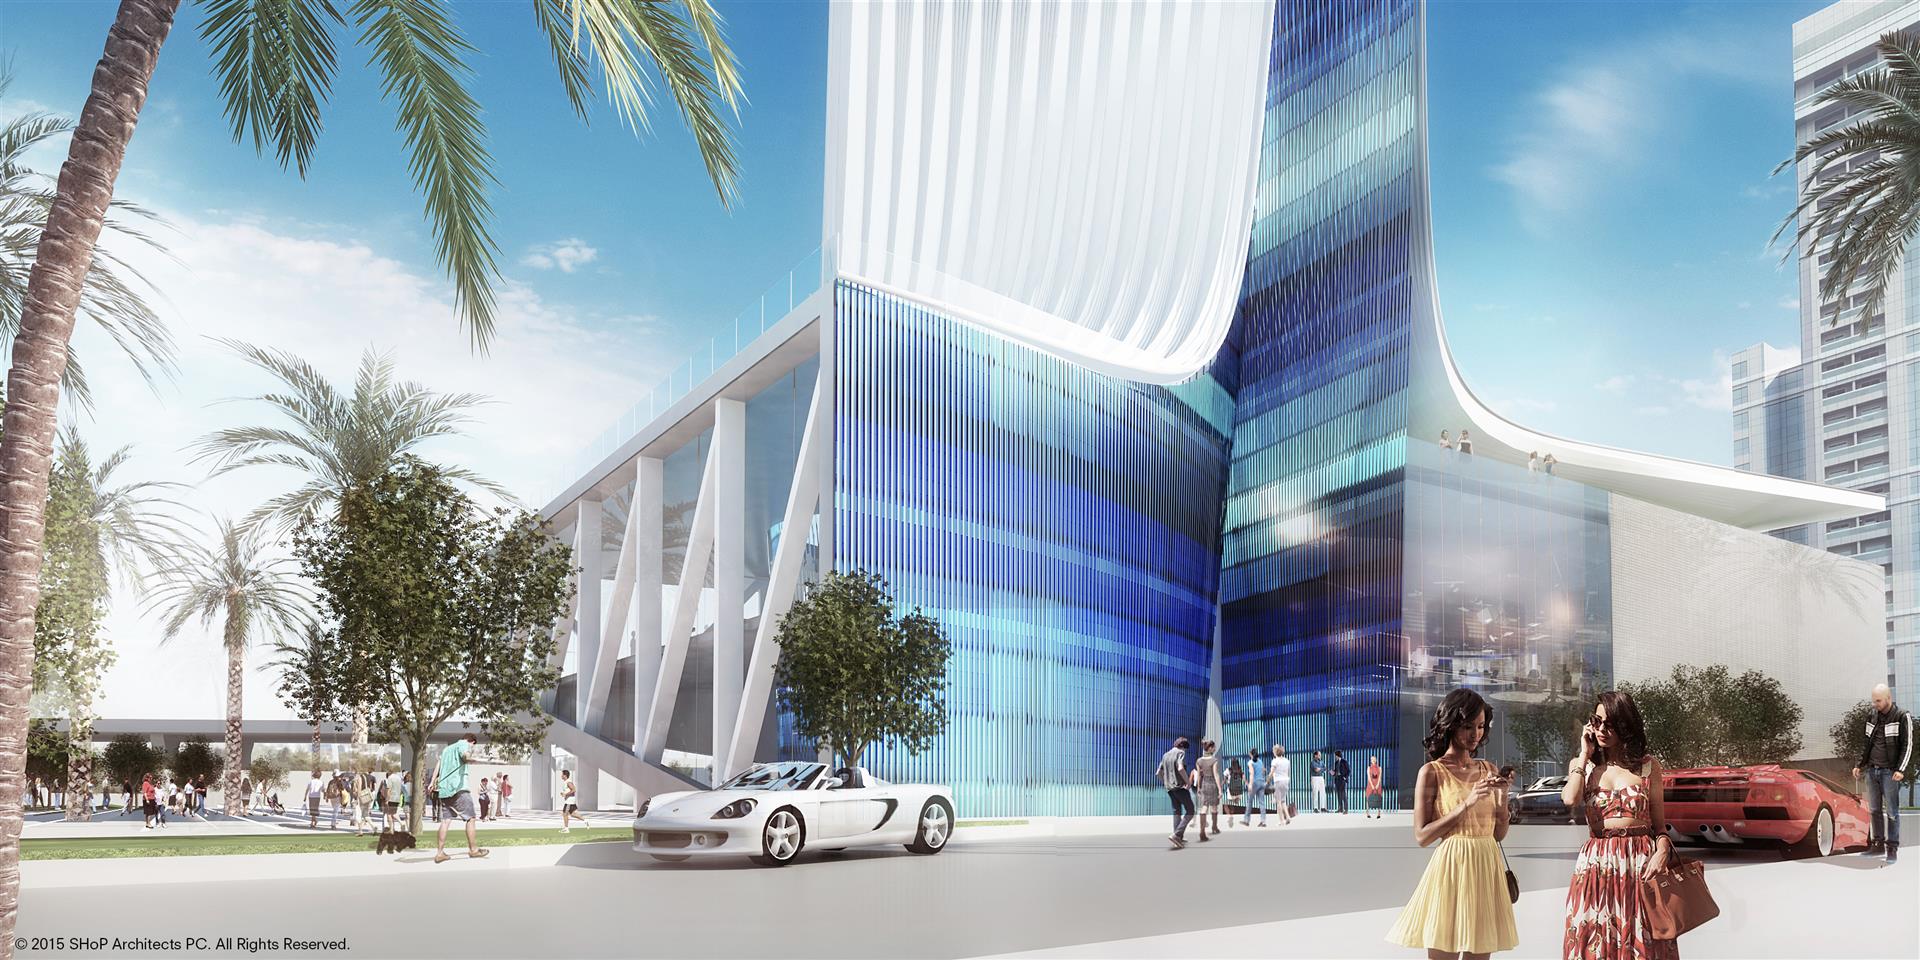 Miami ‘Innovation District’ will have 6.5 million-sf dense, walkable space